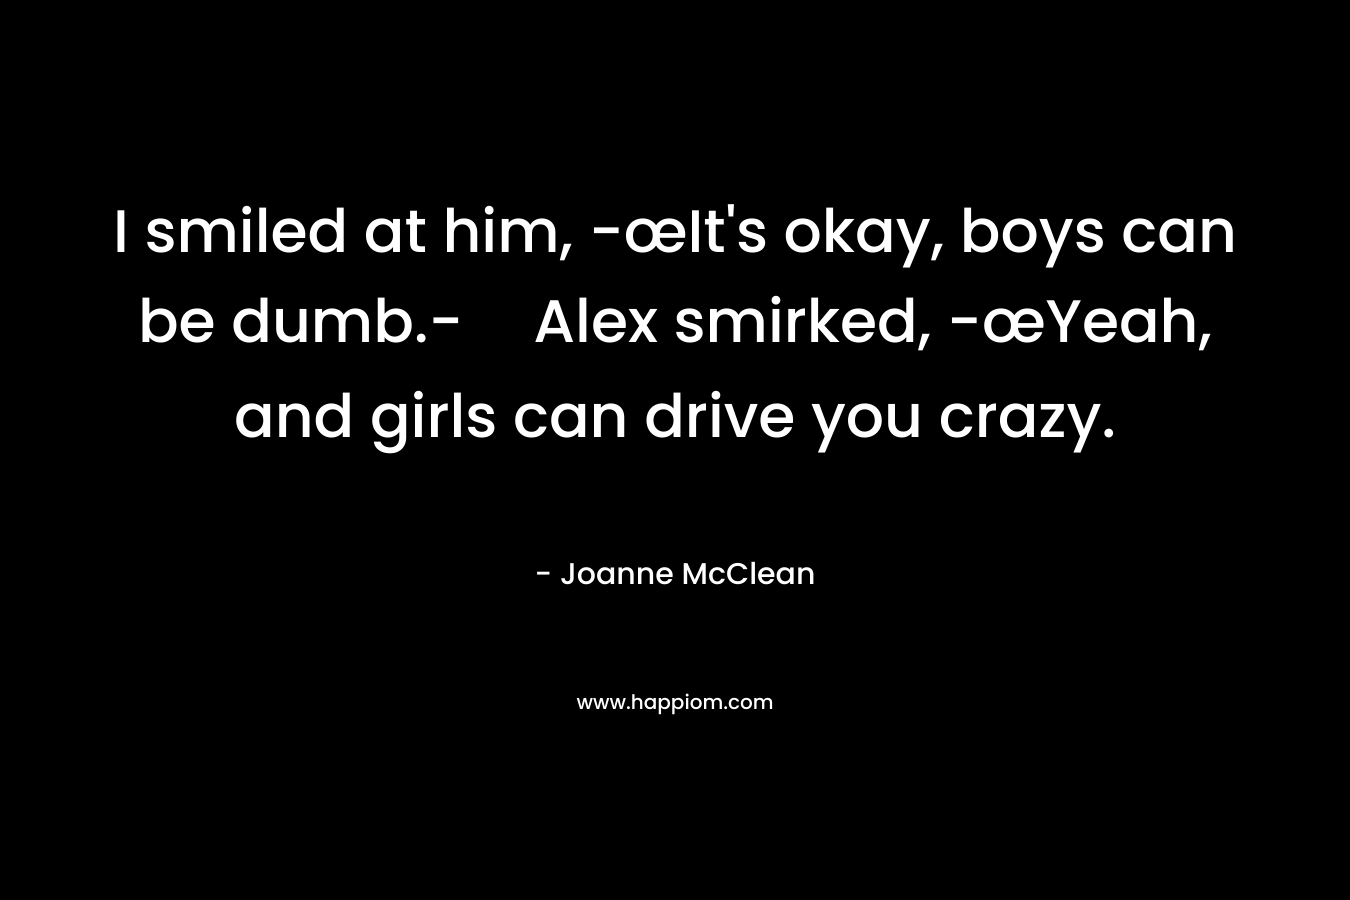 I smiled at him, -œIt’s okay, boys can be dumb.-Alex smirked, -œYeah, and girls can drive you crazy. – Joanne McClean